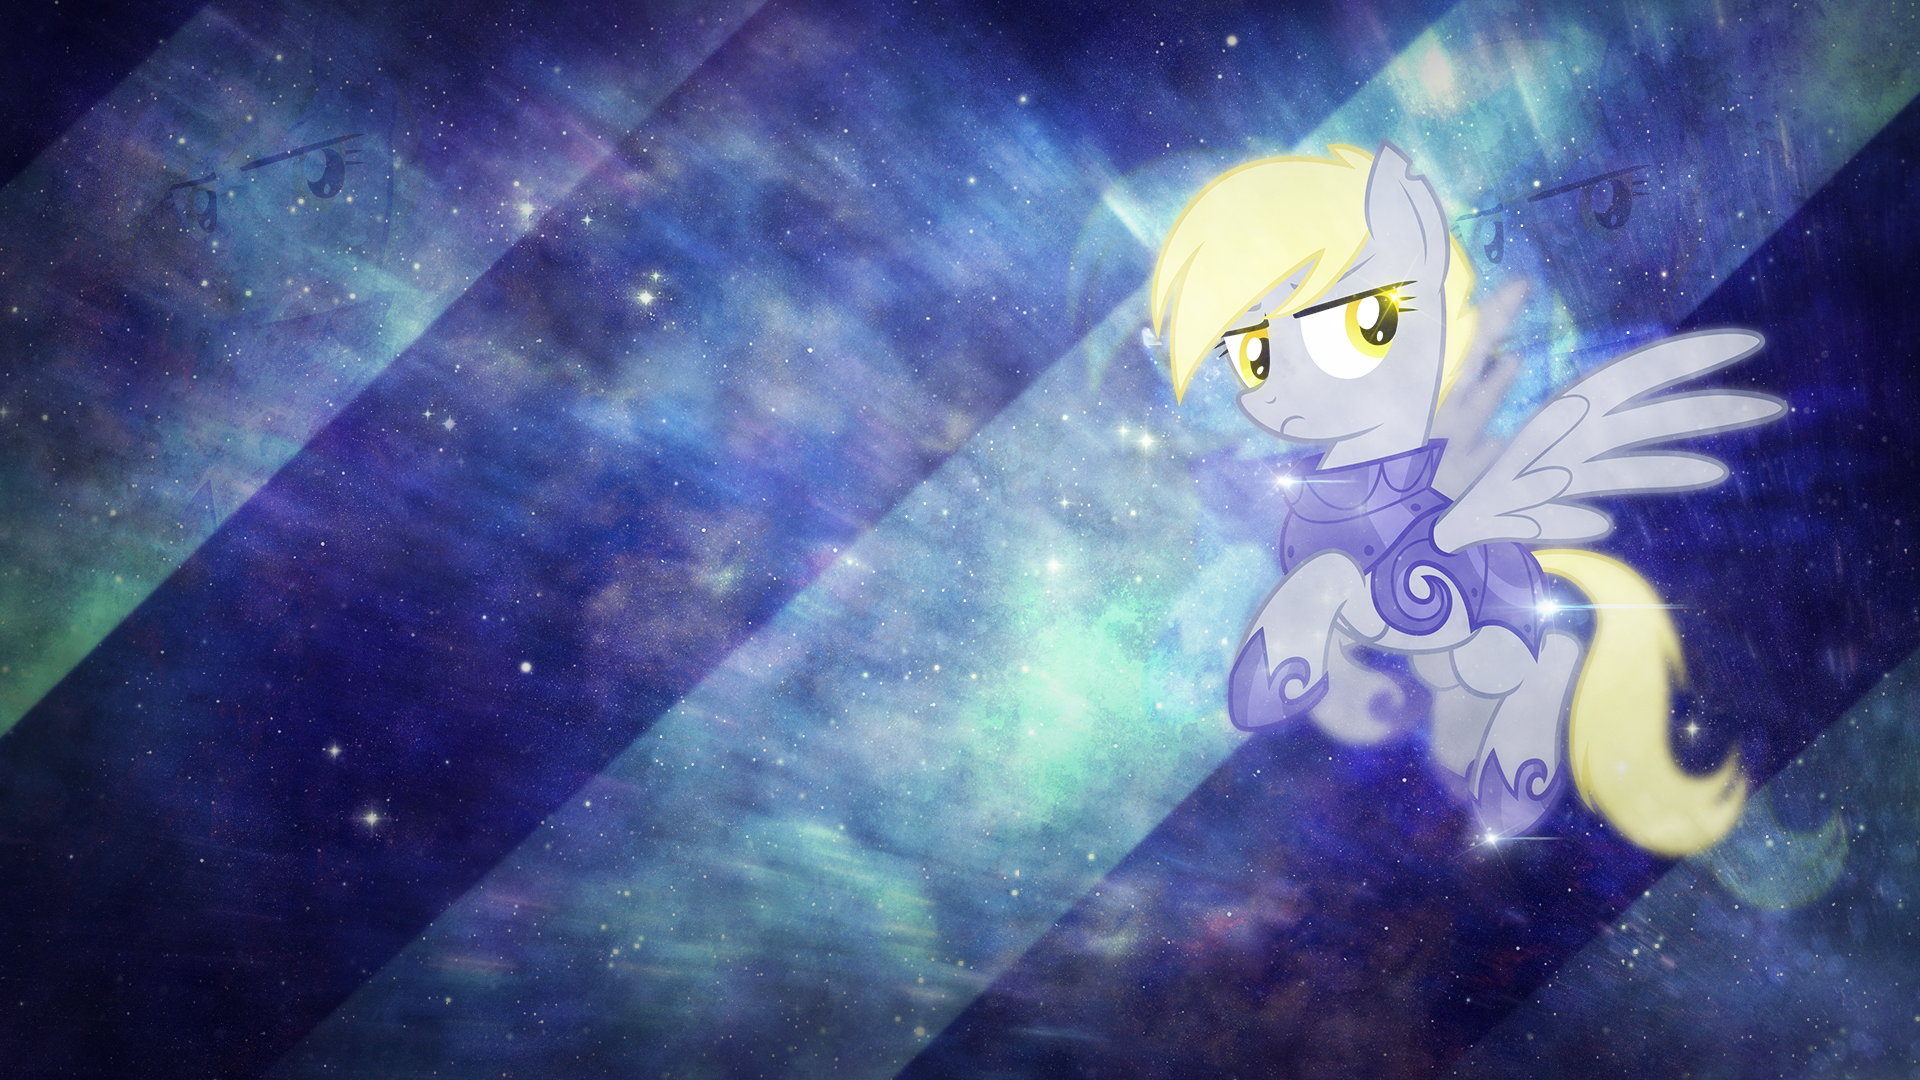 Wallpaper ~ Derpy in 15 minutes. by Equestria-Prevails and Mackaged